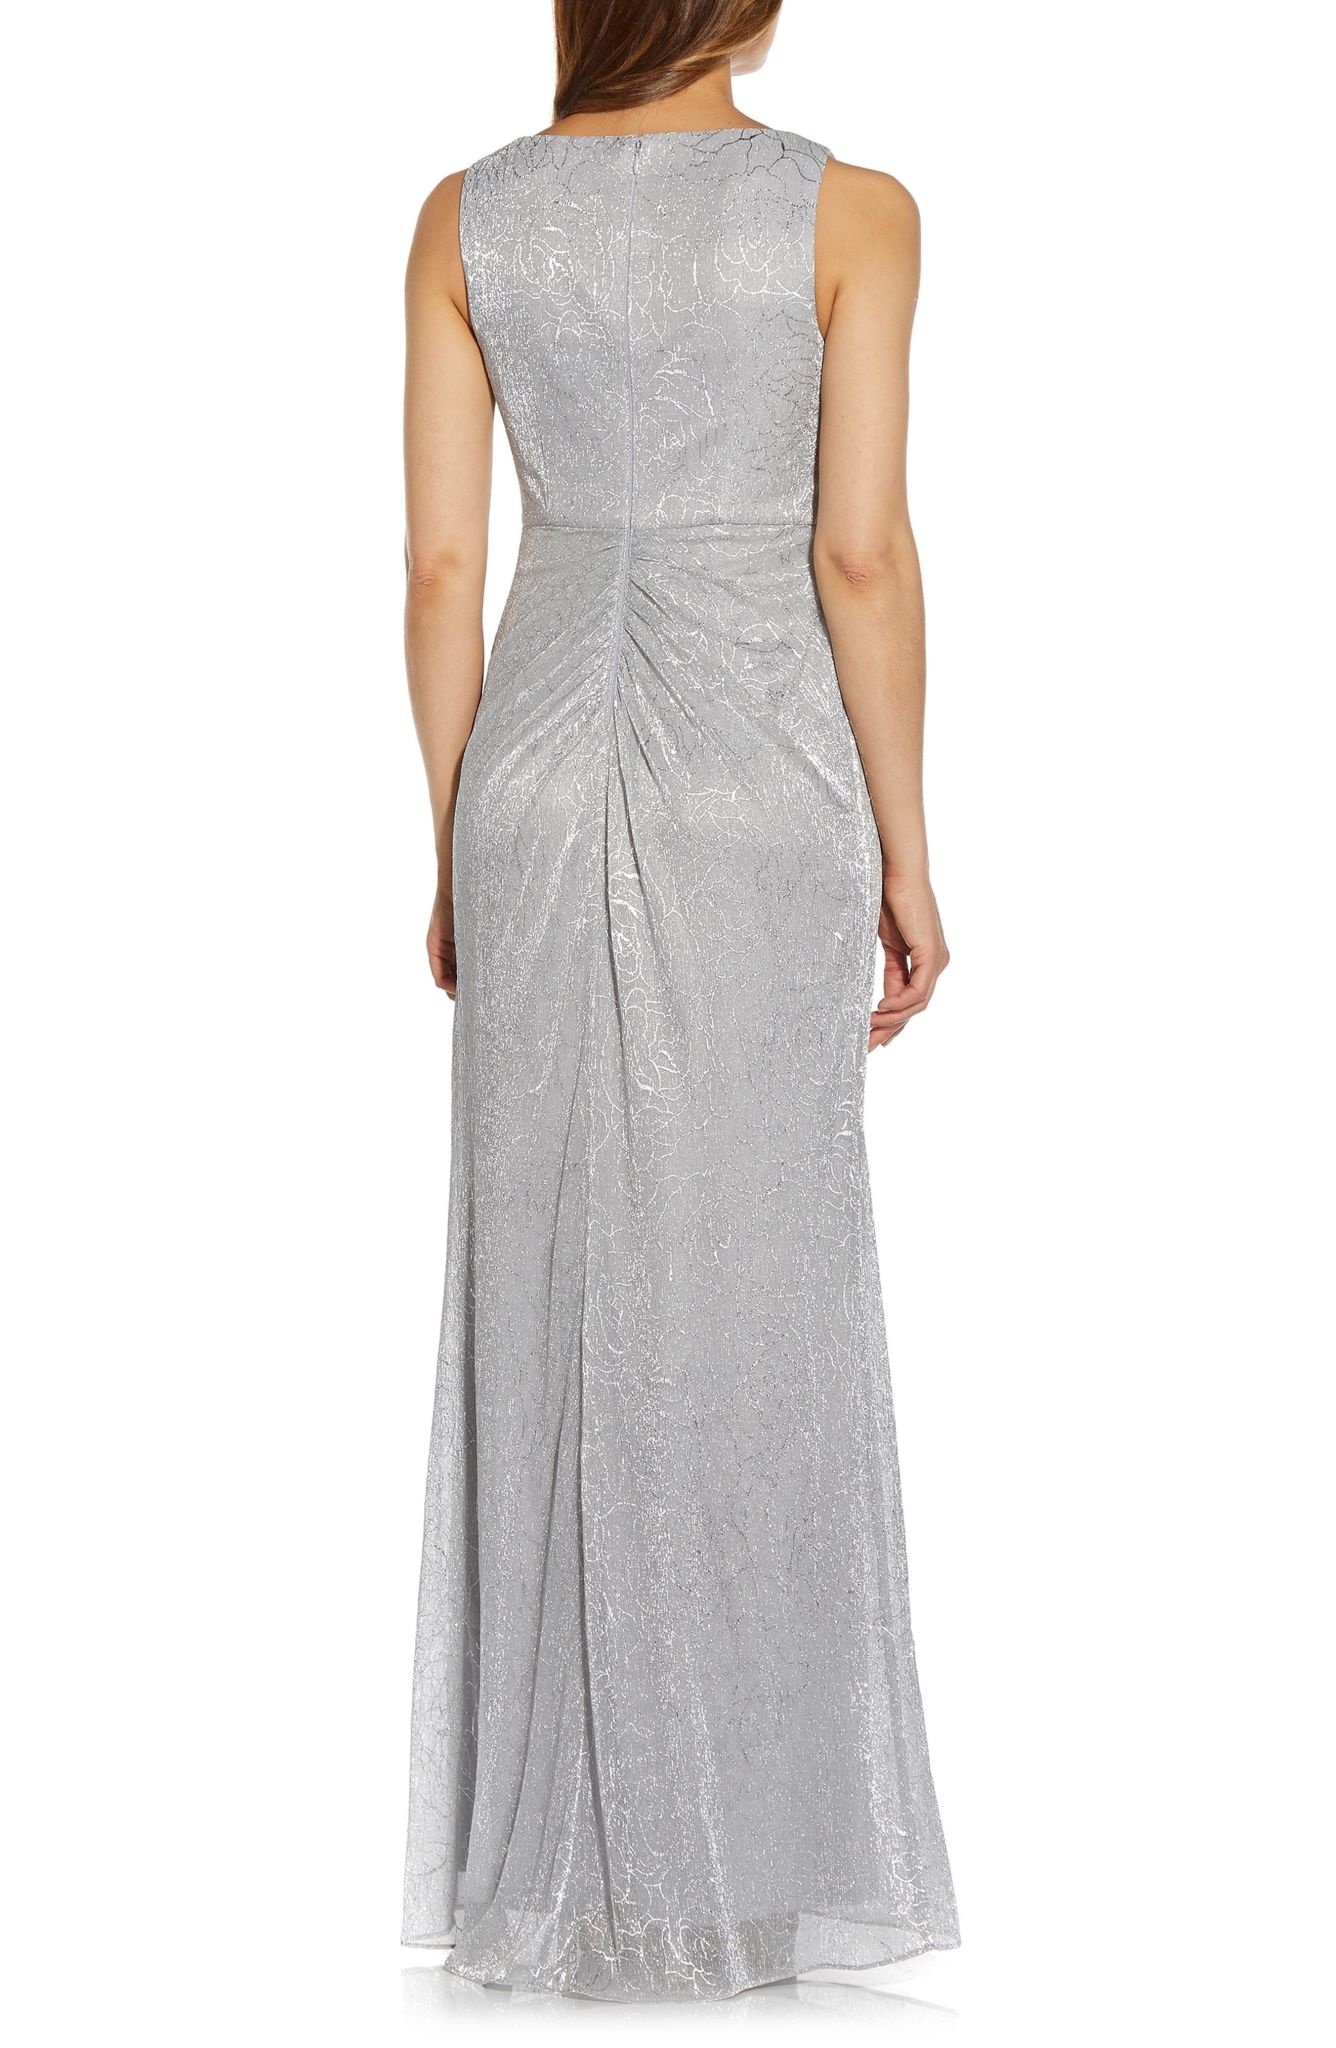 ADRIANNA PAPELL ADRIANNA PAPELL STENCIL MESH DRAPED LONG GOWNS